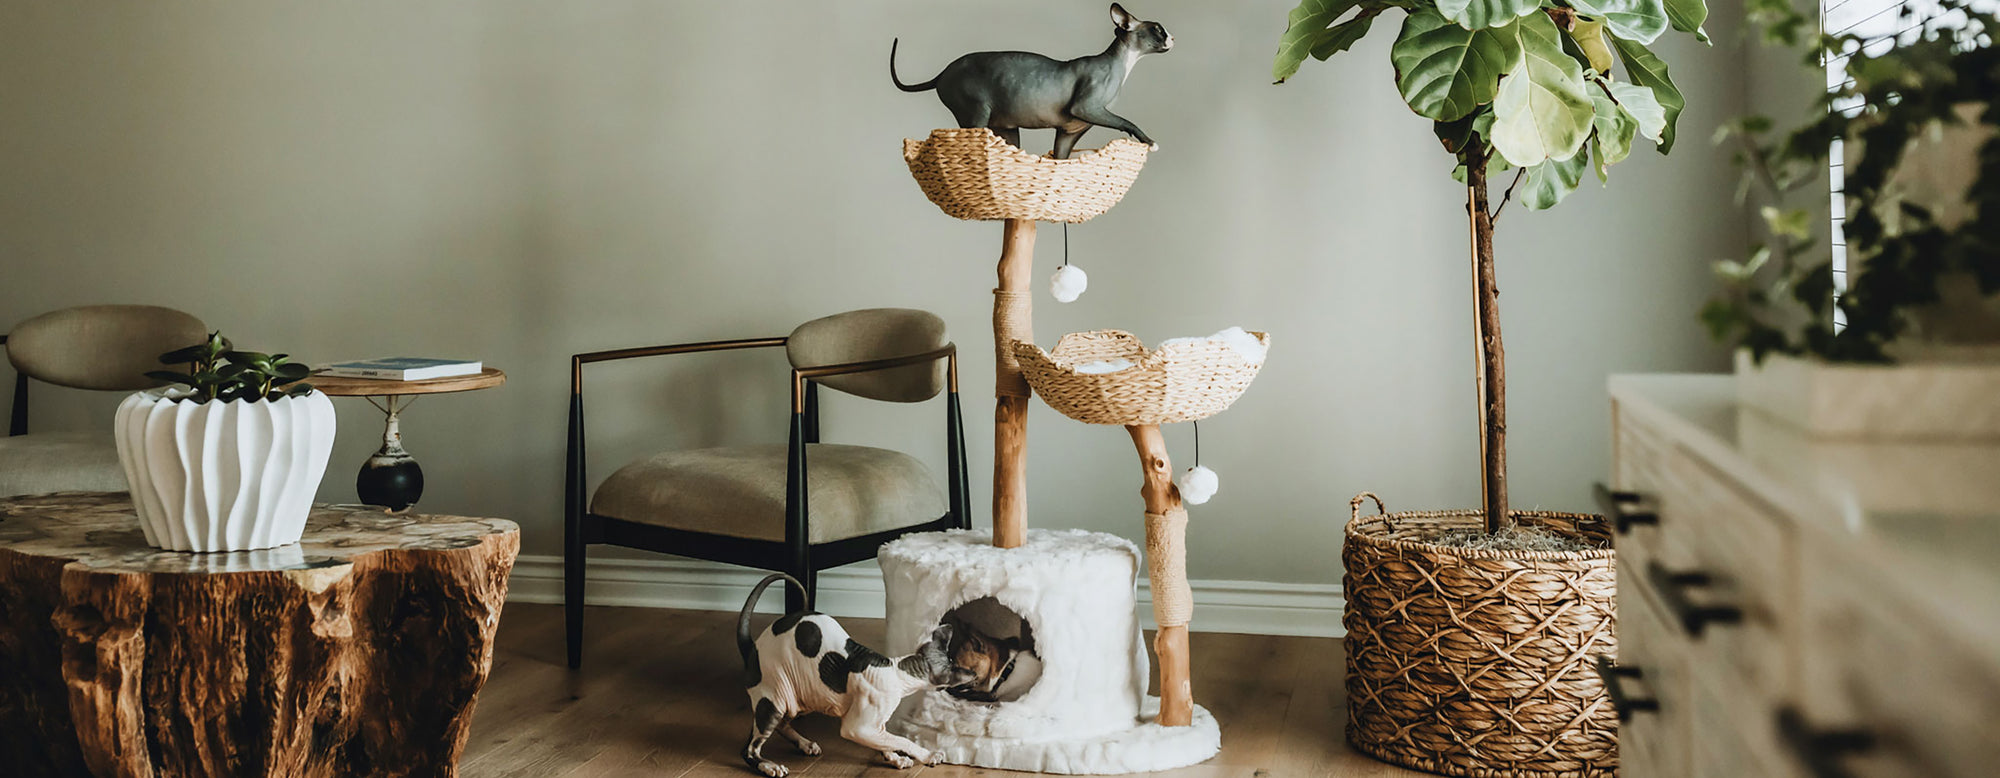 lifestyle banner showing cats interacting with a stylish cat tree. Click to shop pet furniture collection